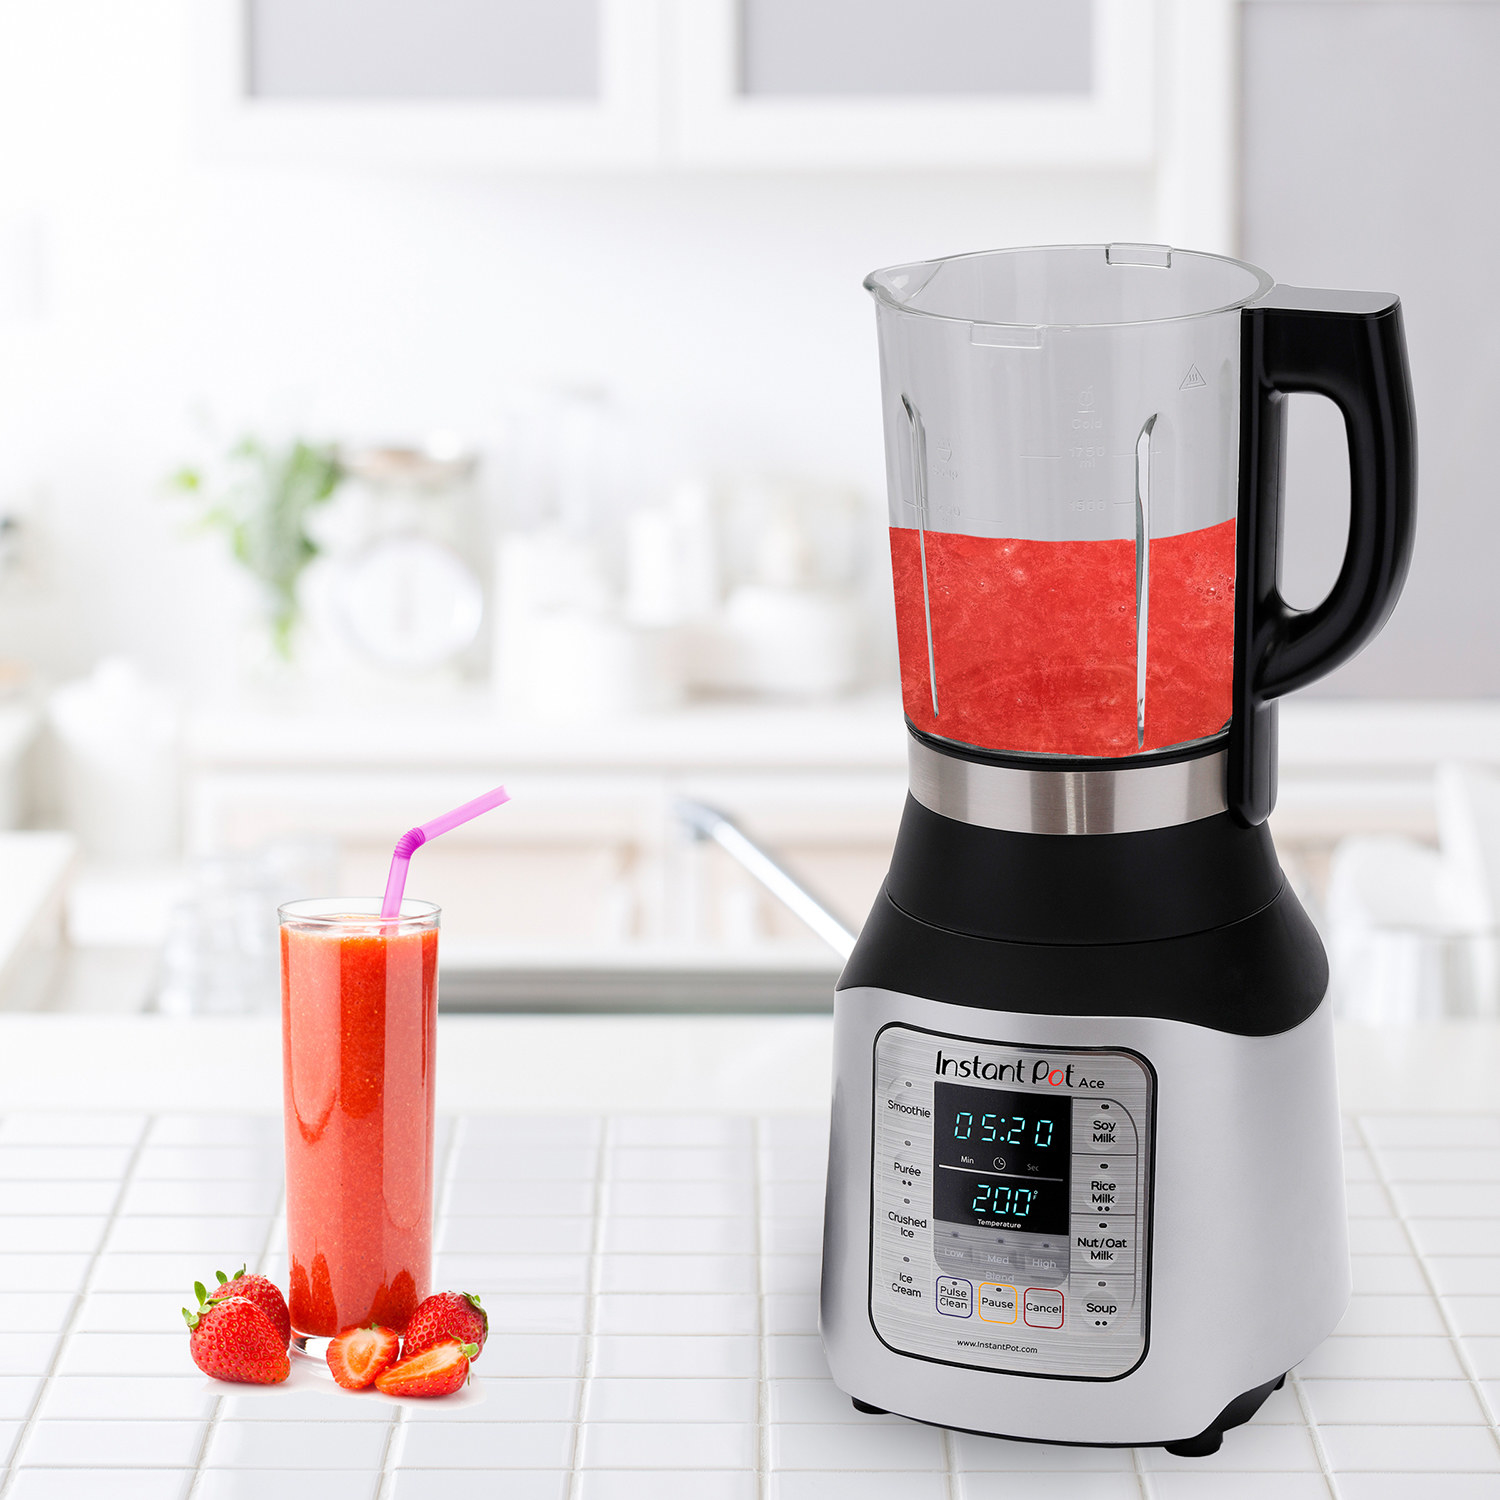 The blender, which has buttons for all settings in the base